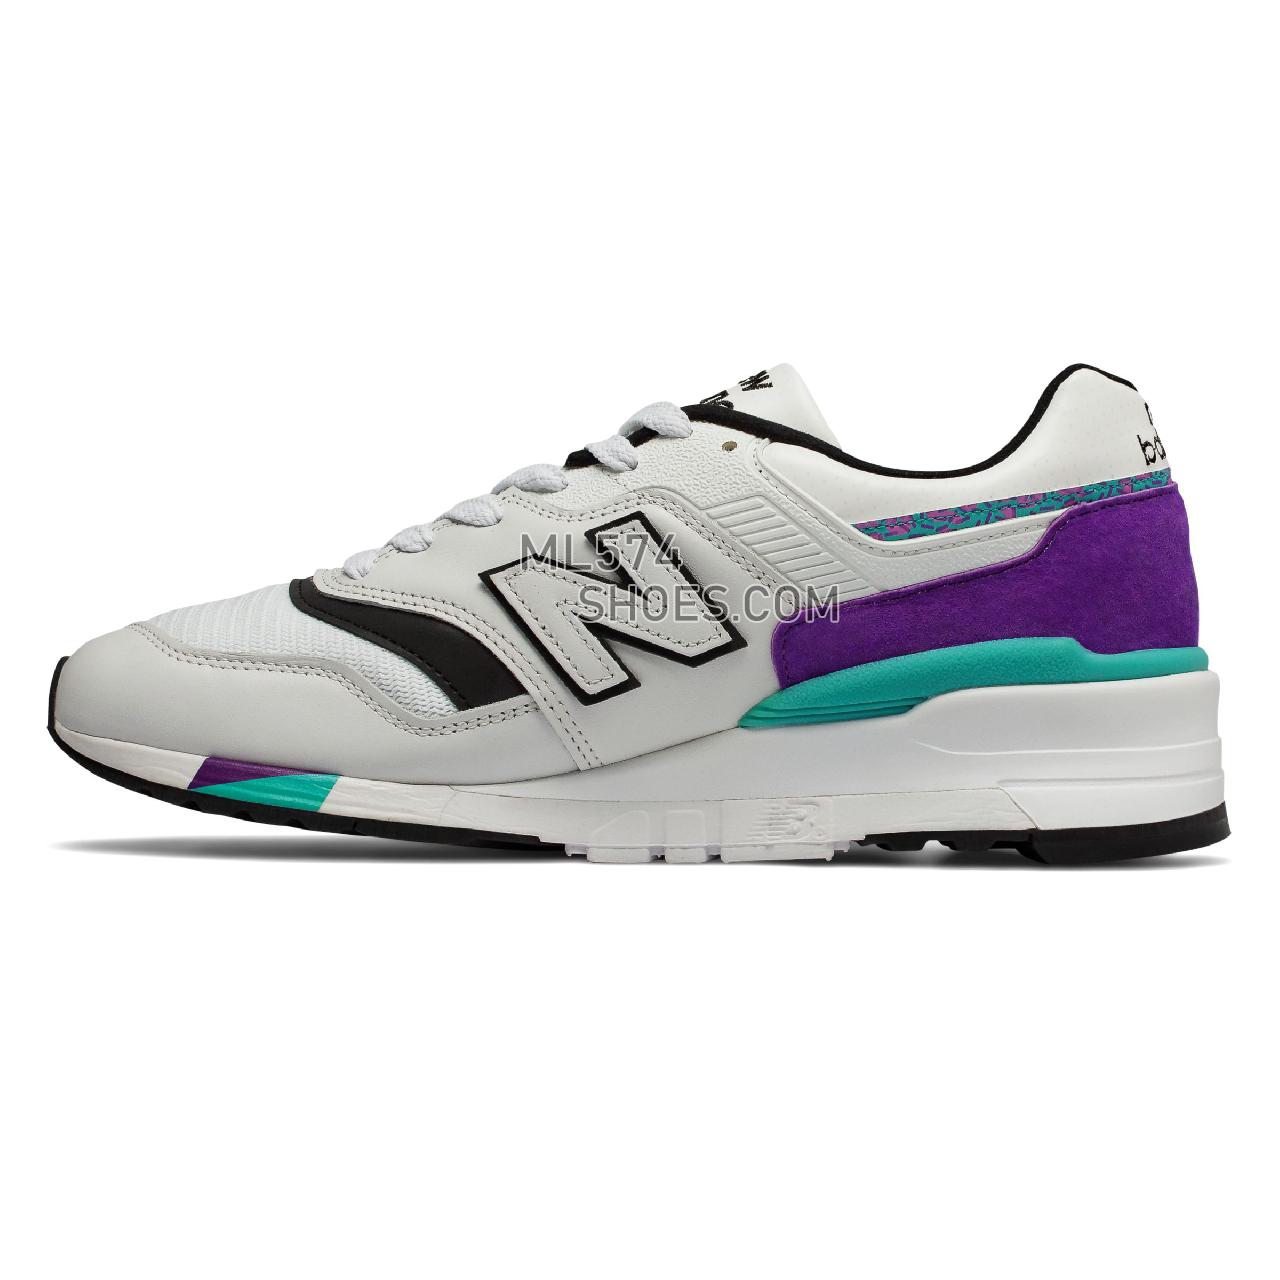 New Balance 997 Made in US - Men's 997 - Classic Light Grey Marl with Purple - M997WEA